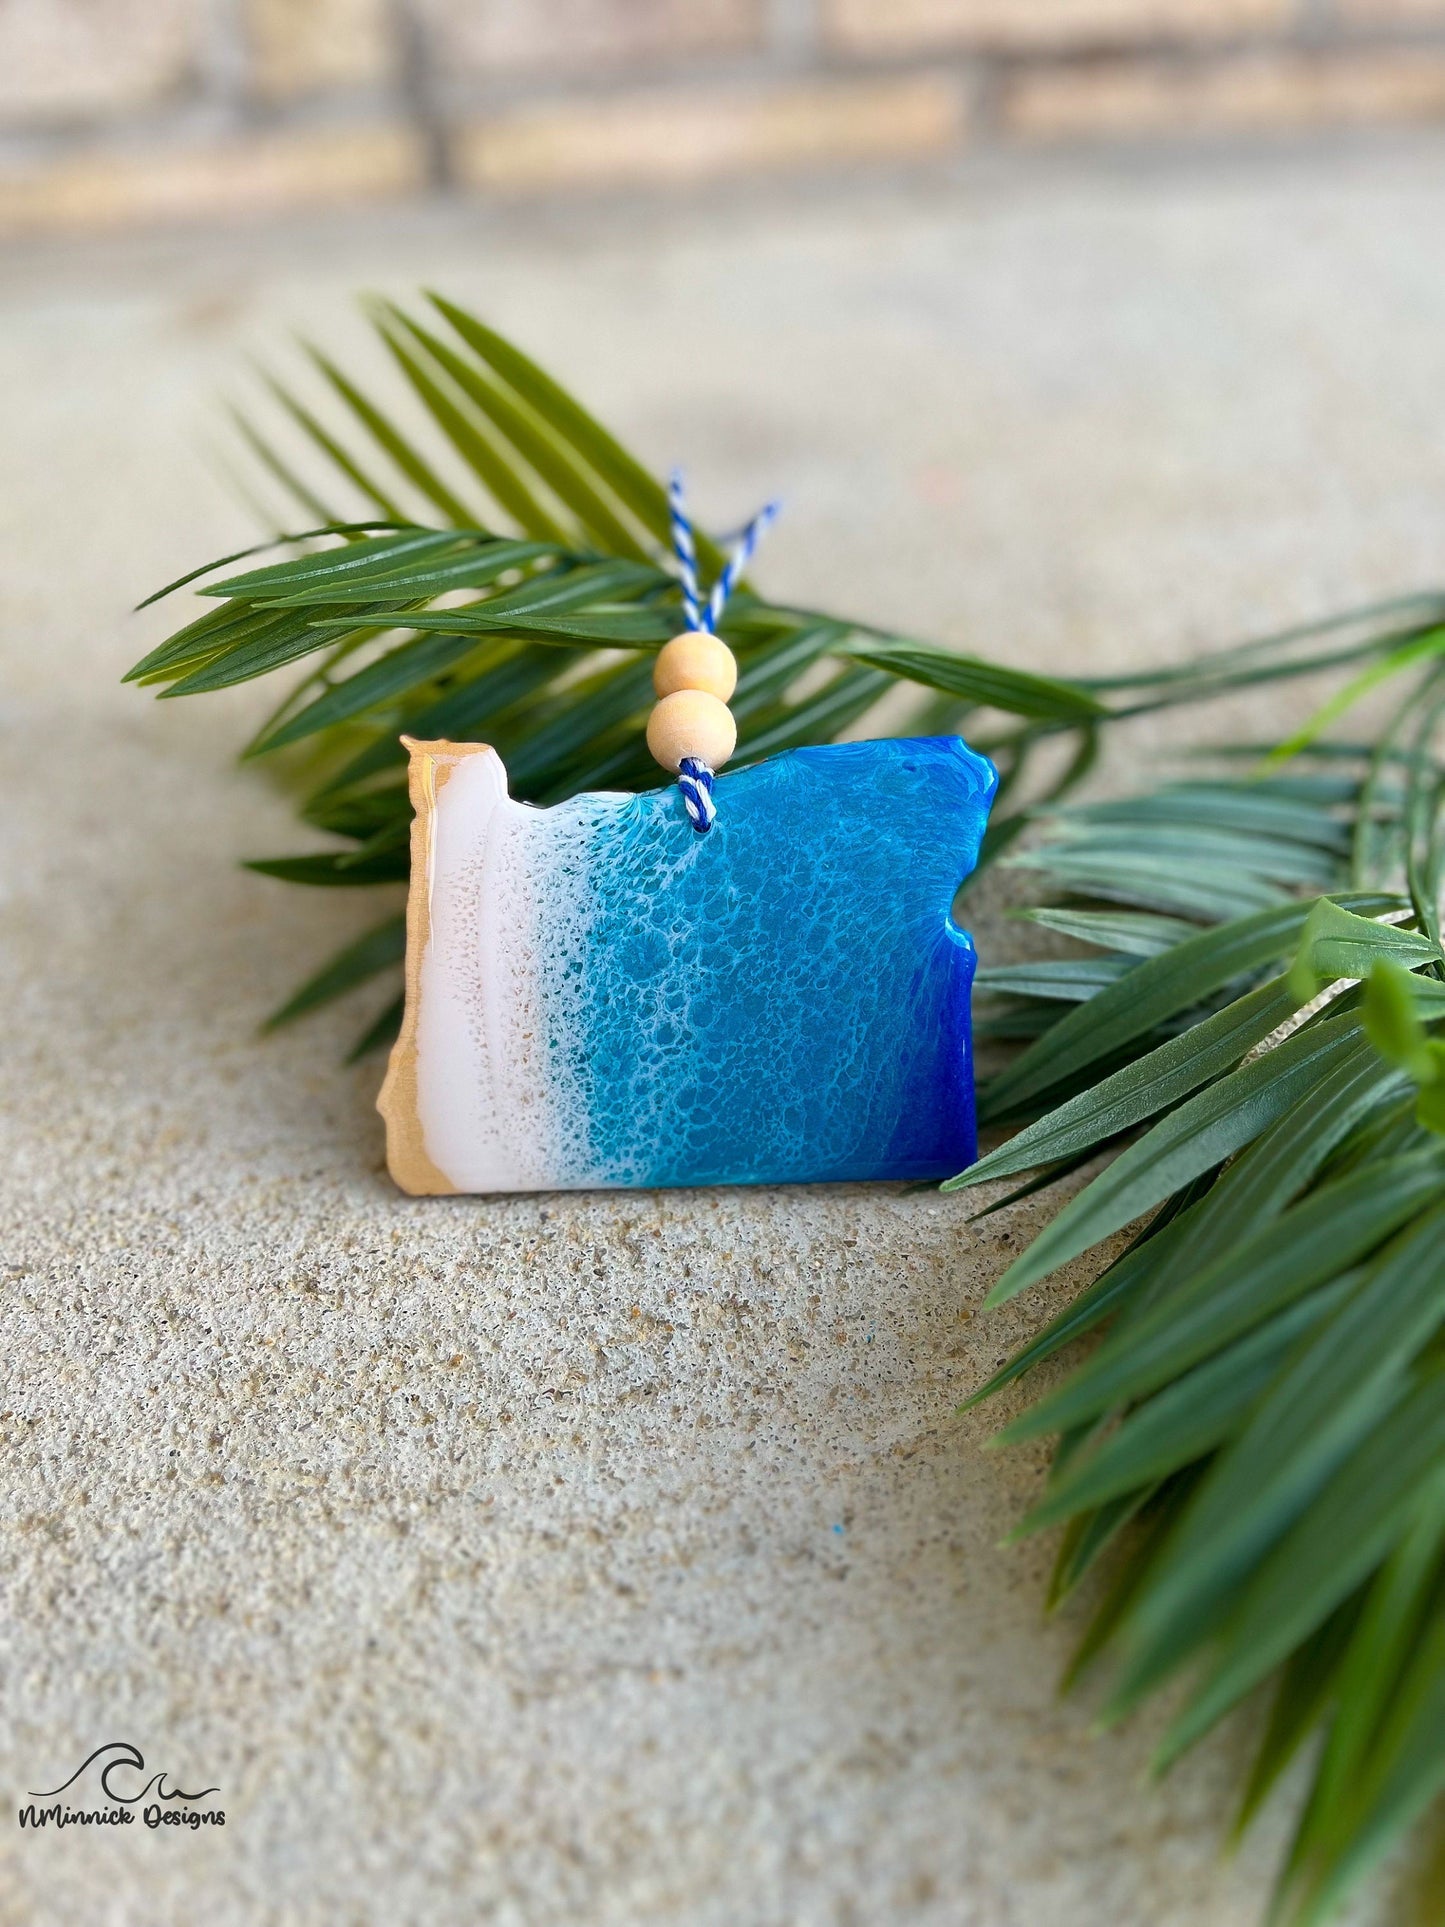 Oregon shaped wooden ornament with ocean resin art laying against palm leaves.